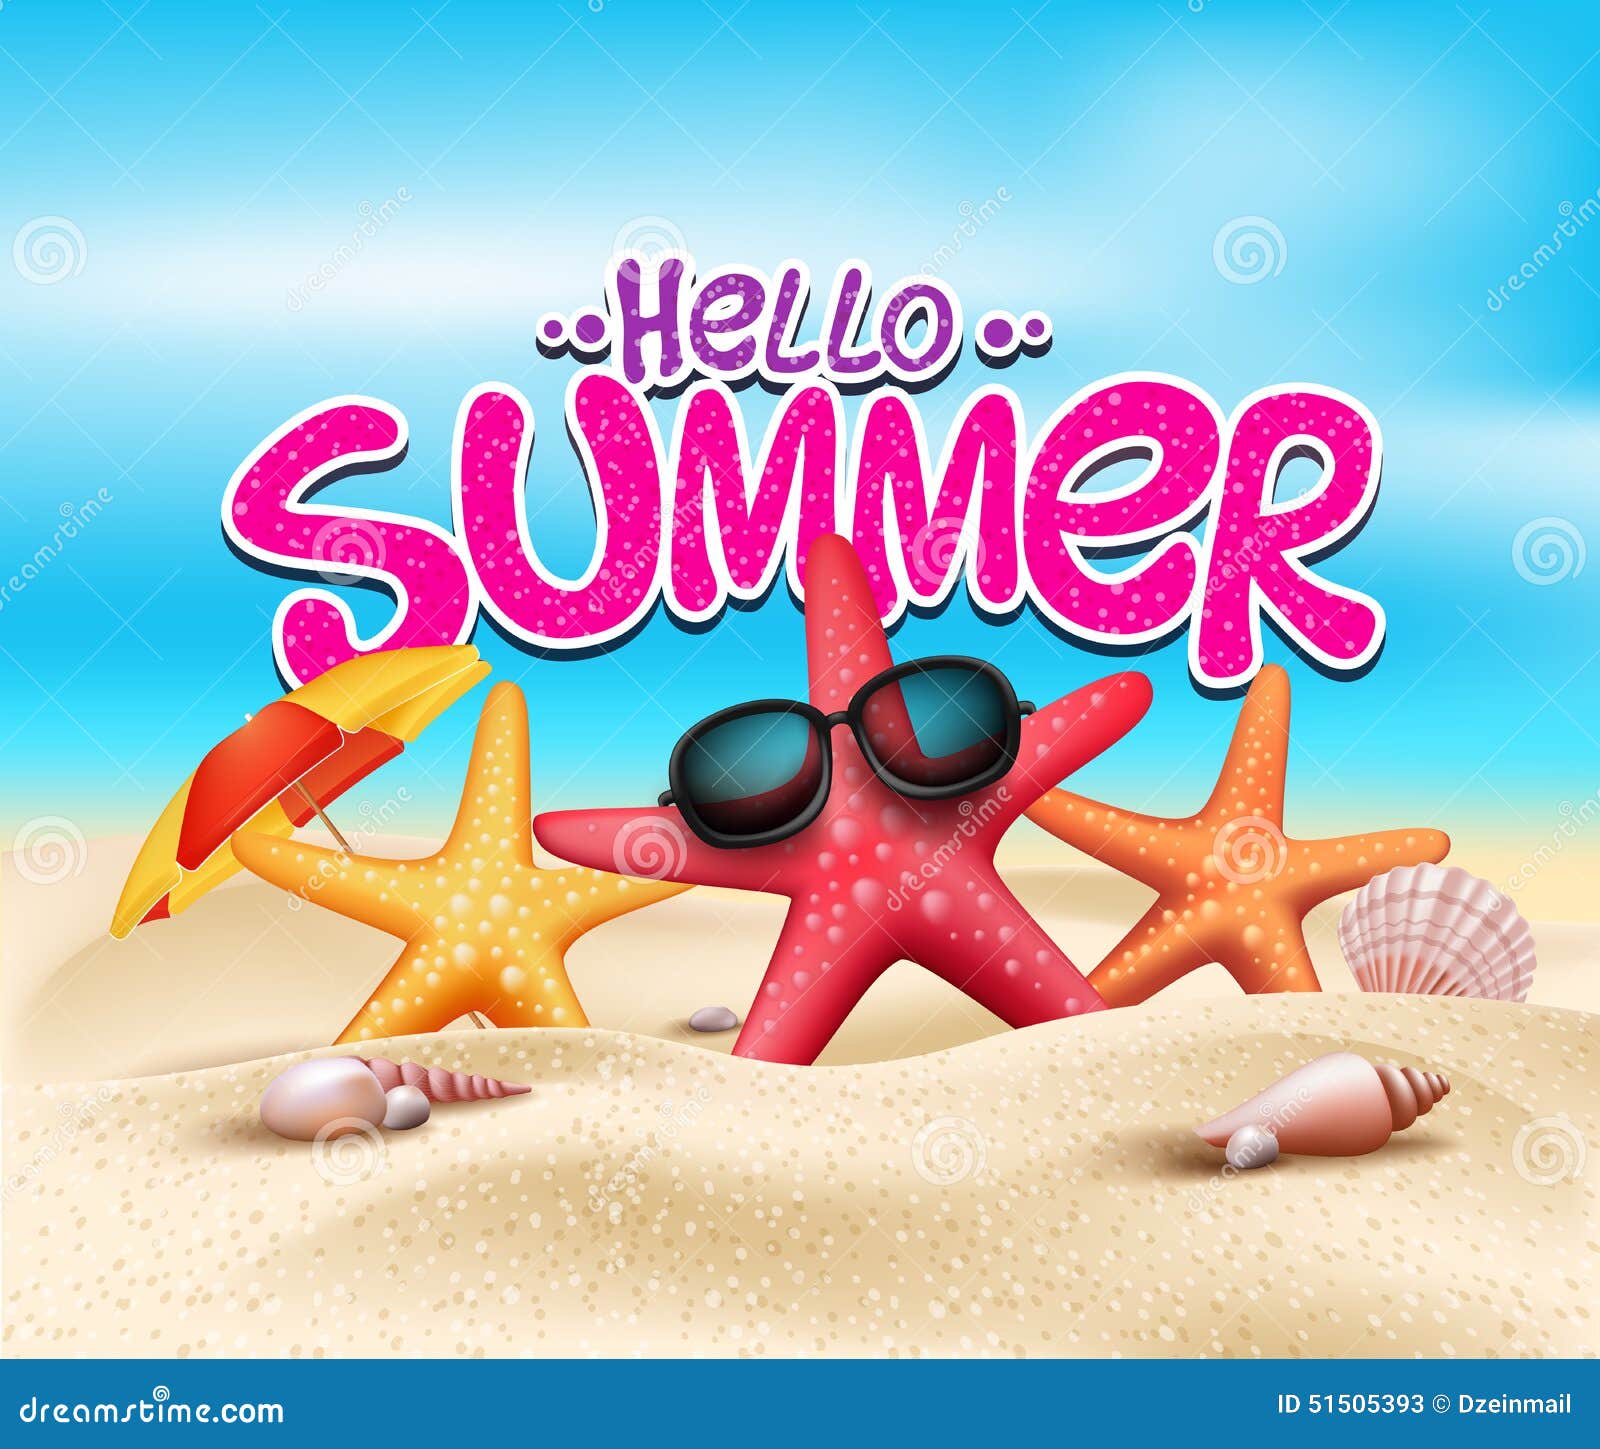 hello summer in beach seashore with realistic objects